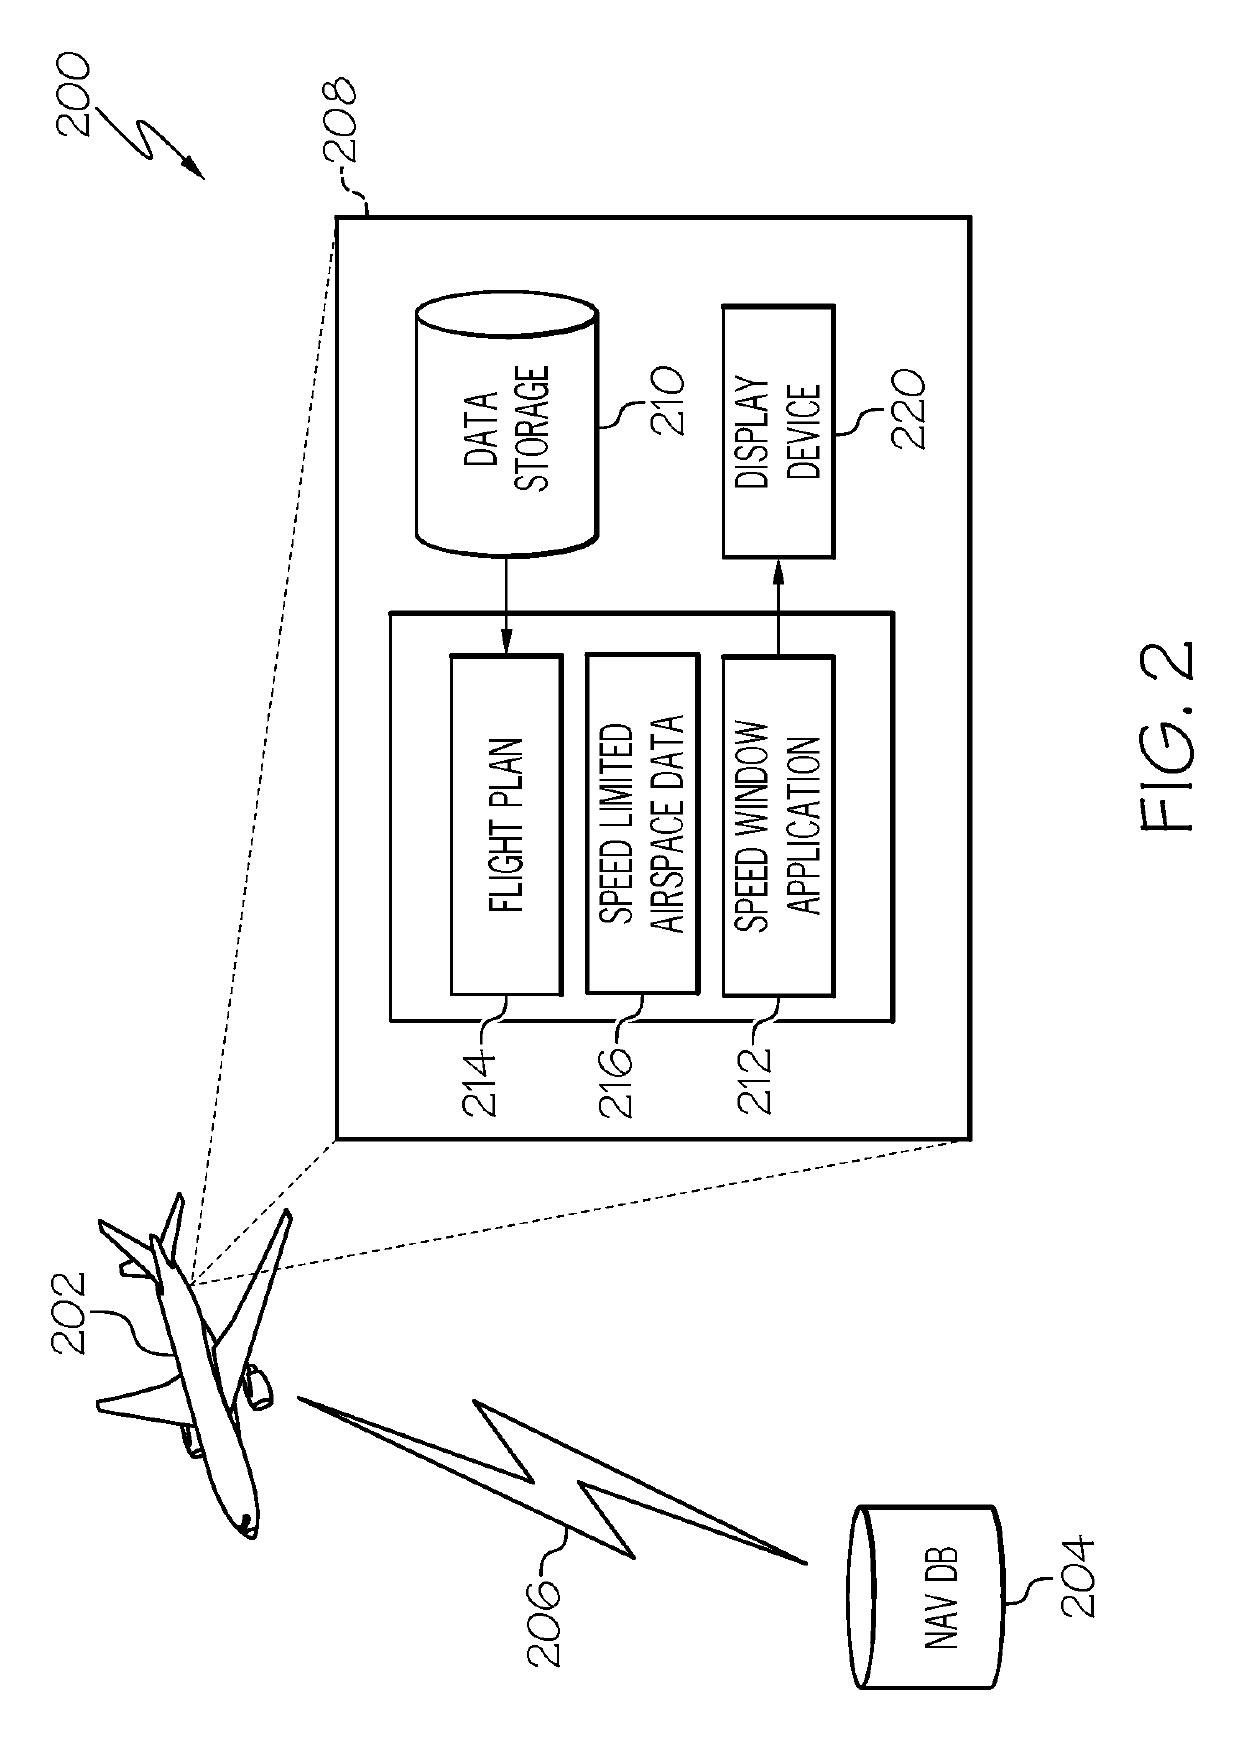 Method and system for generating an alert for an aircraft potentially exceeding speed limits in restricted airspace